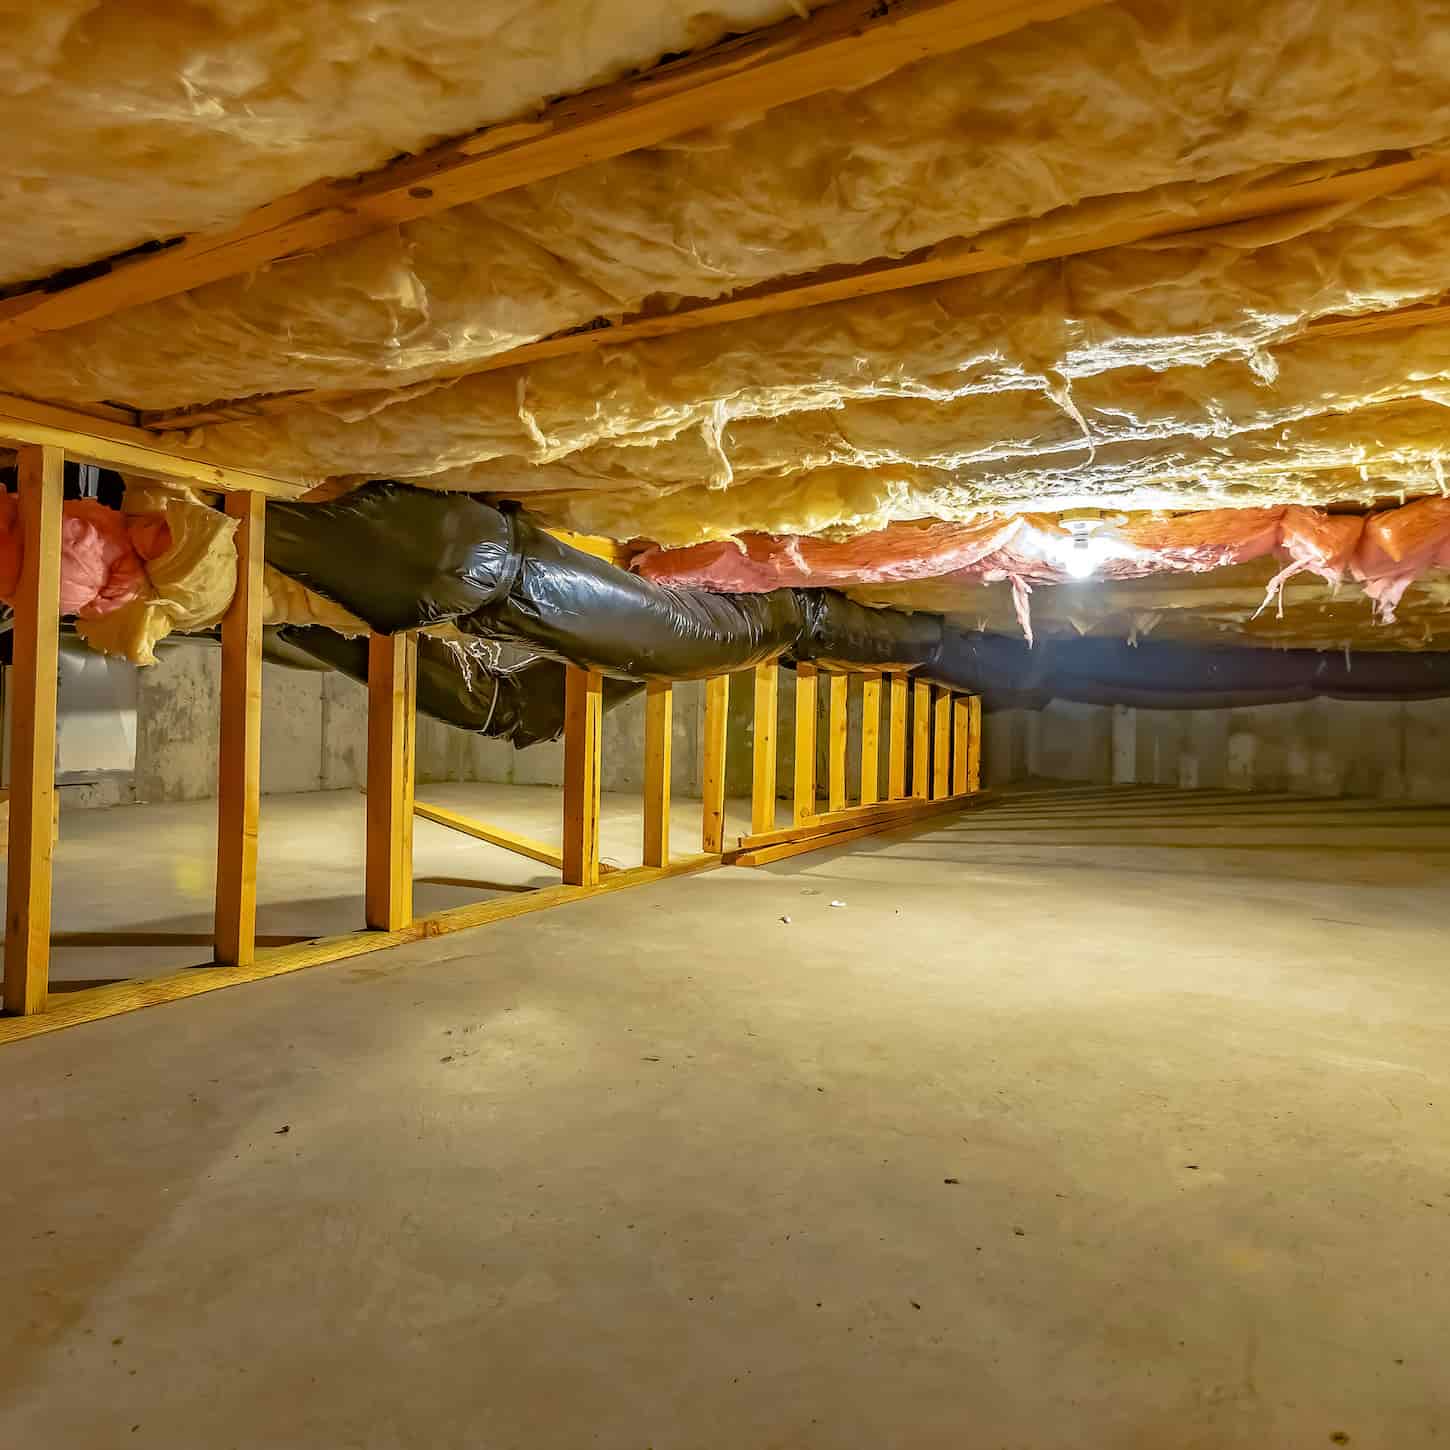 An image of a Square frame Basement or crawl space with upper-floor insulation and wooden support beams.